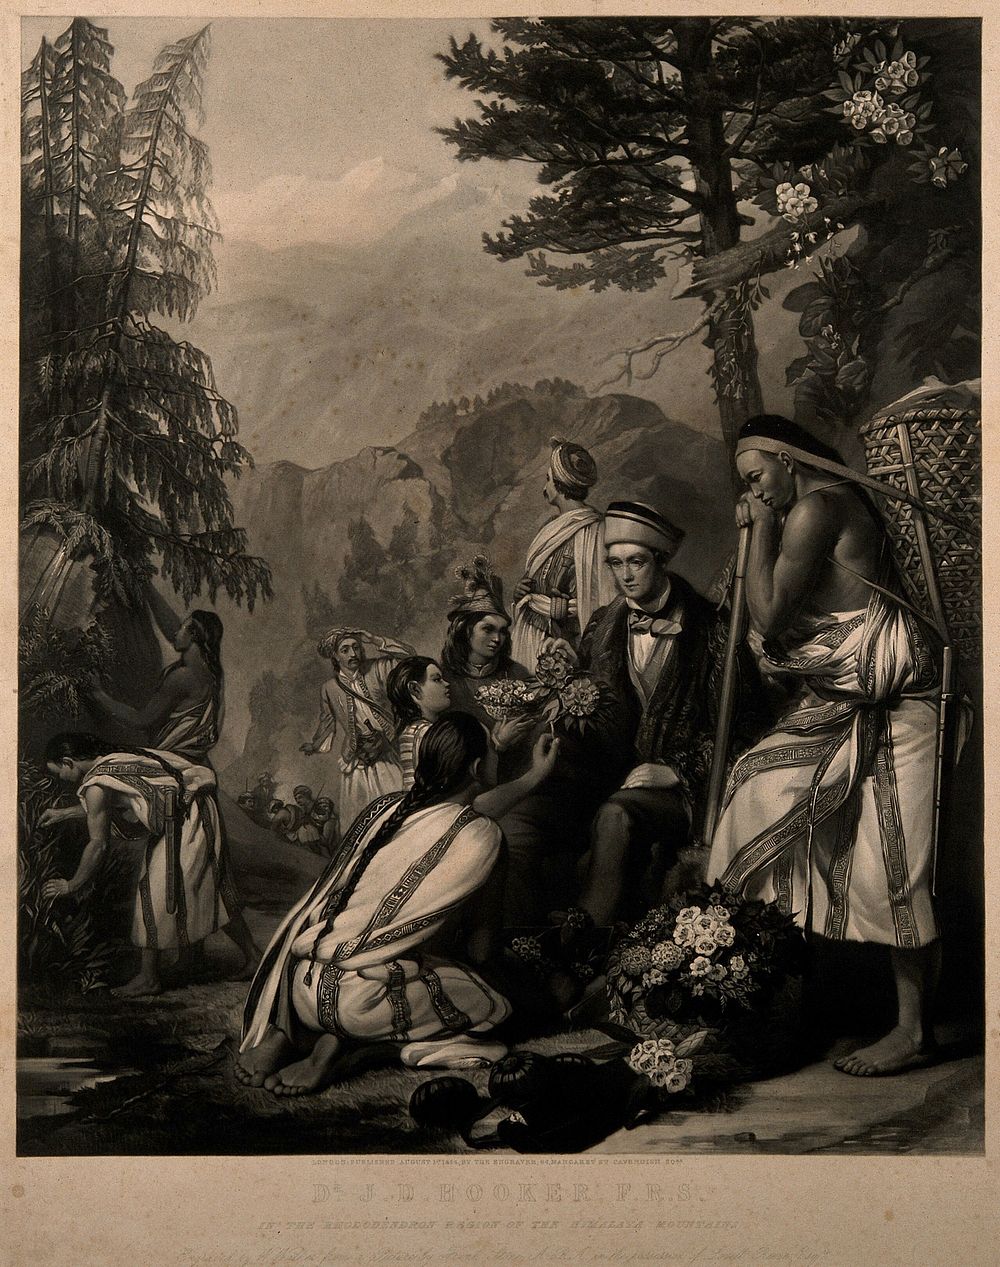 Sir Joseph Dalton Hooker in the Rhododendron area of the Himalaya. Mezzotint by W. Walker, after F. Stone, 1854.